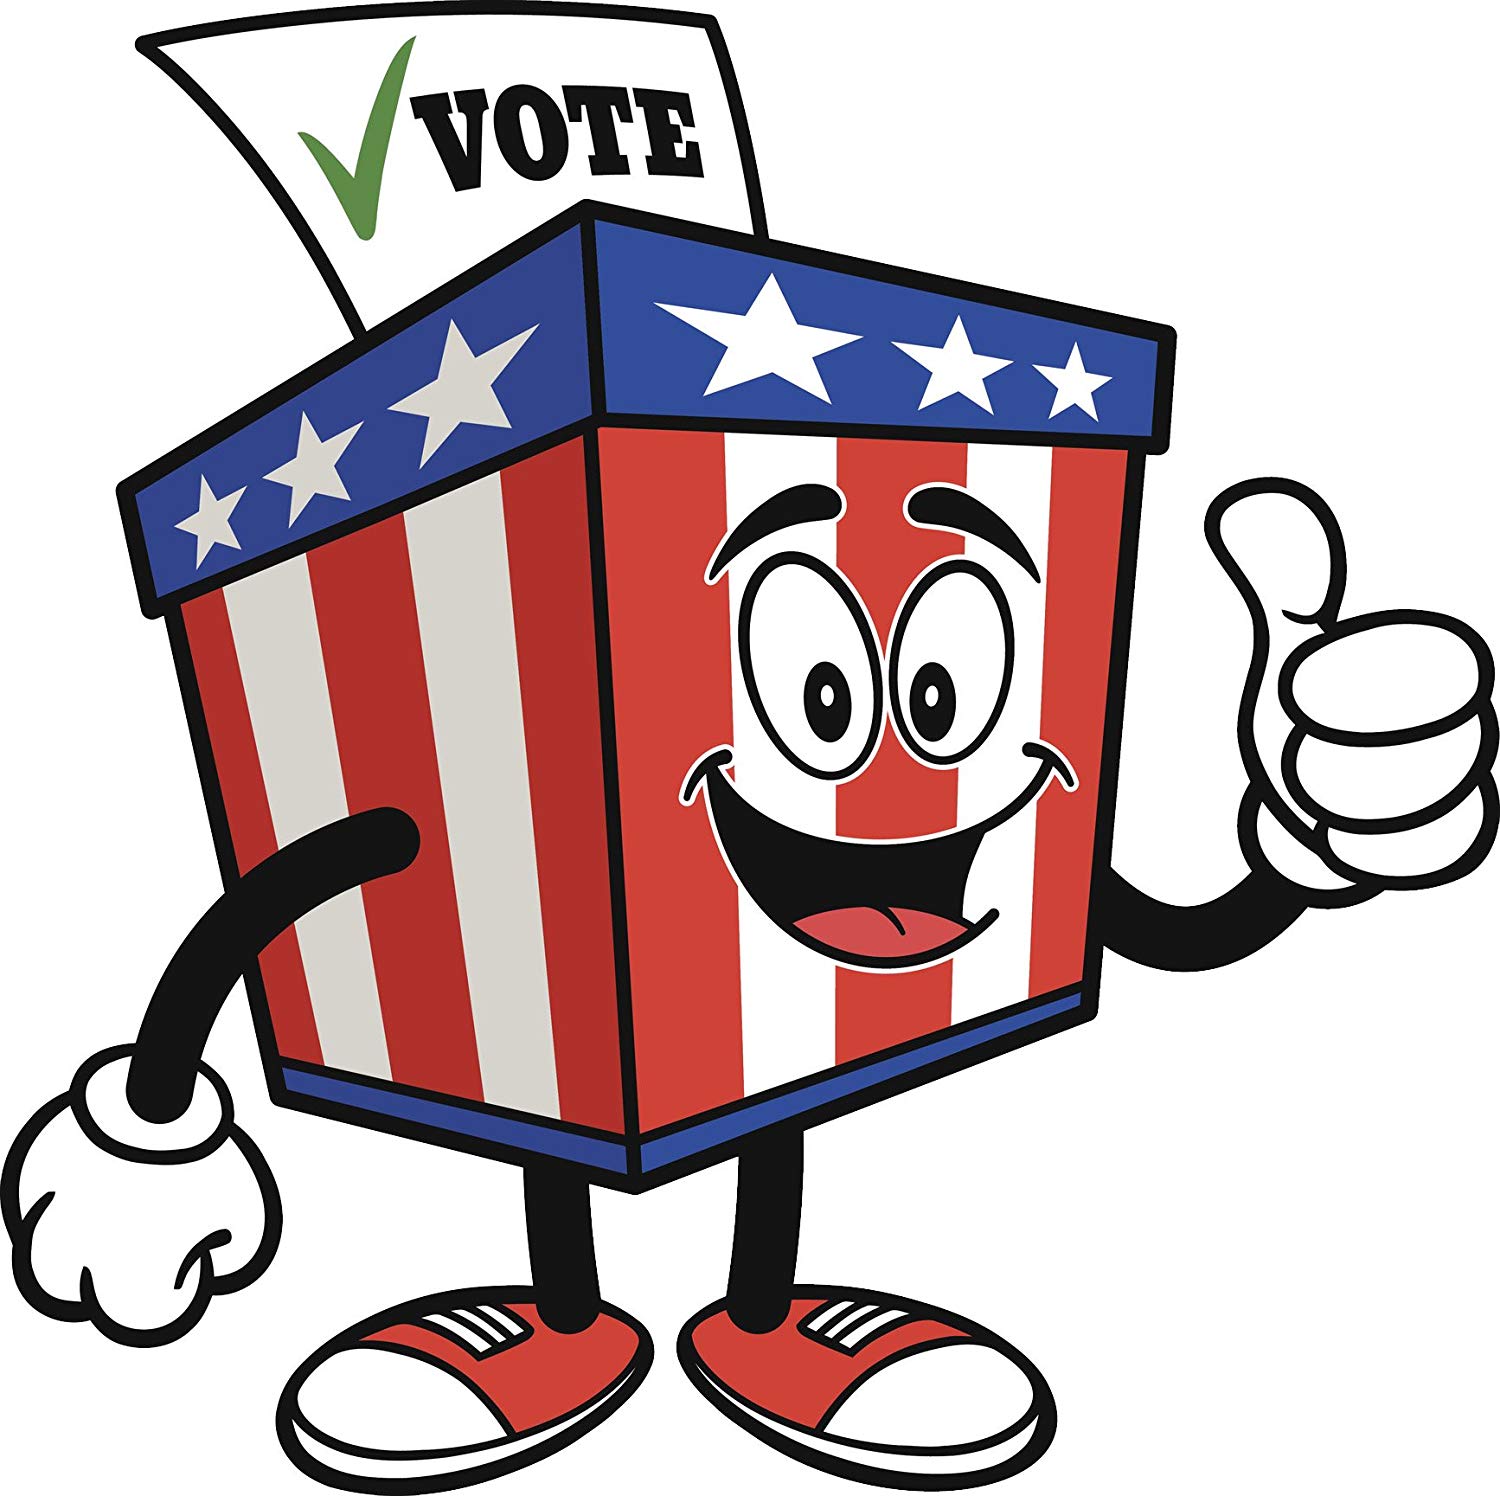 Image for Sample Ballots Now Available for the November 3rd Election